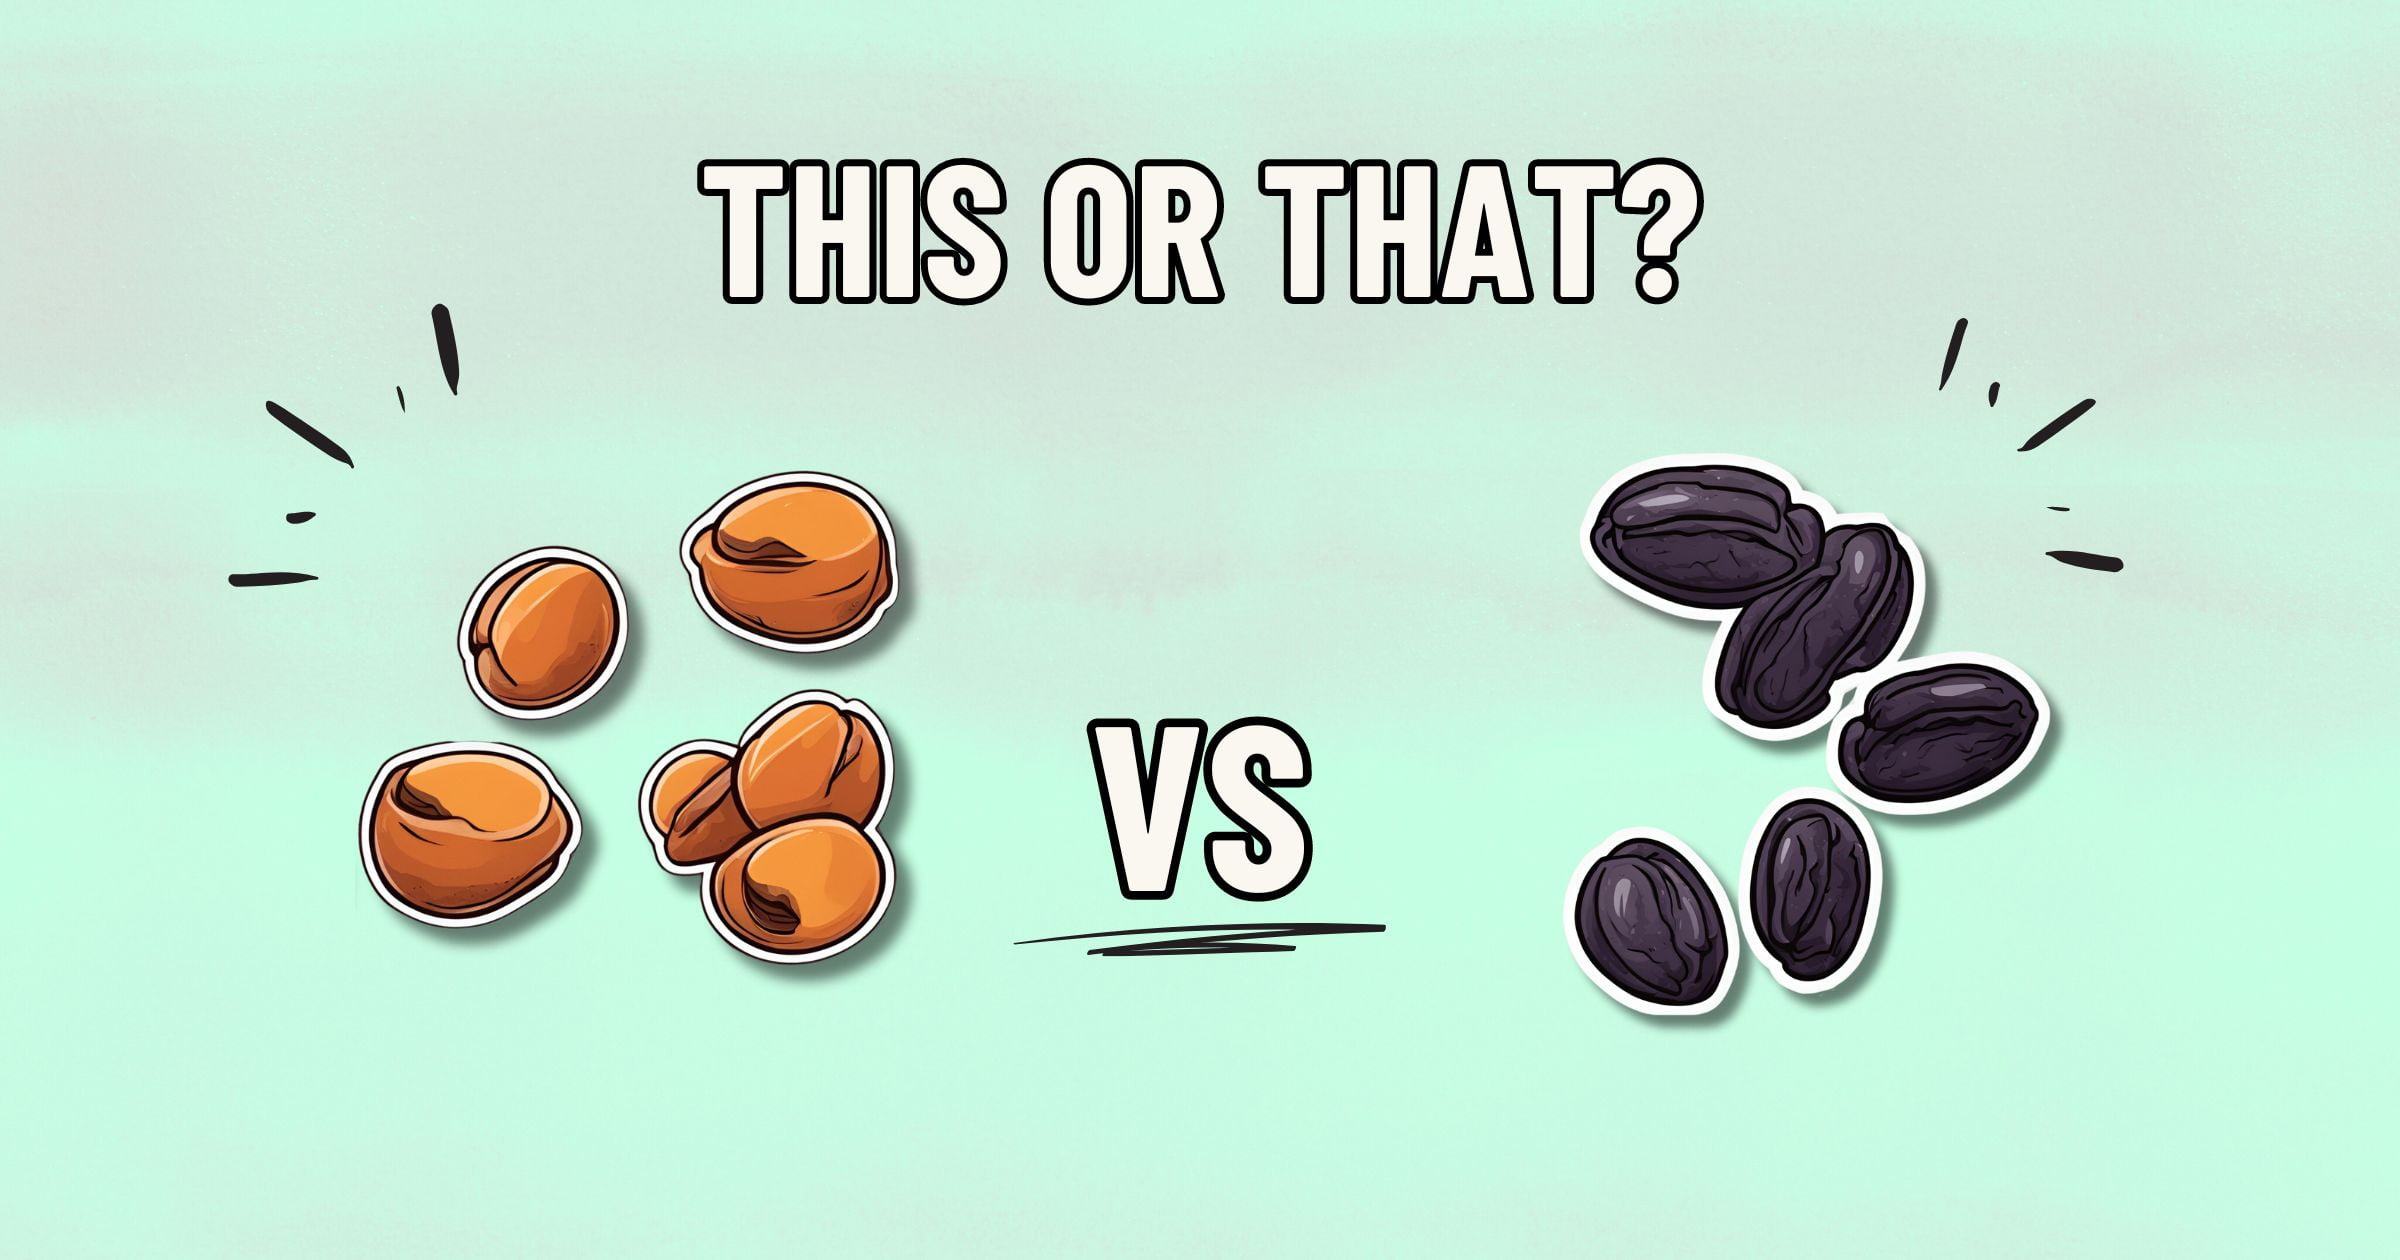 Illustration showing an orange-colored fruit labeled "This" on the left, and a black-colored fruit labeled "That" on the right. Both are arranged in small clusters. A "VS" is placed in the middle, with the text "This or That?" at the top. Which is healthier: dried prunes or dried apricots?